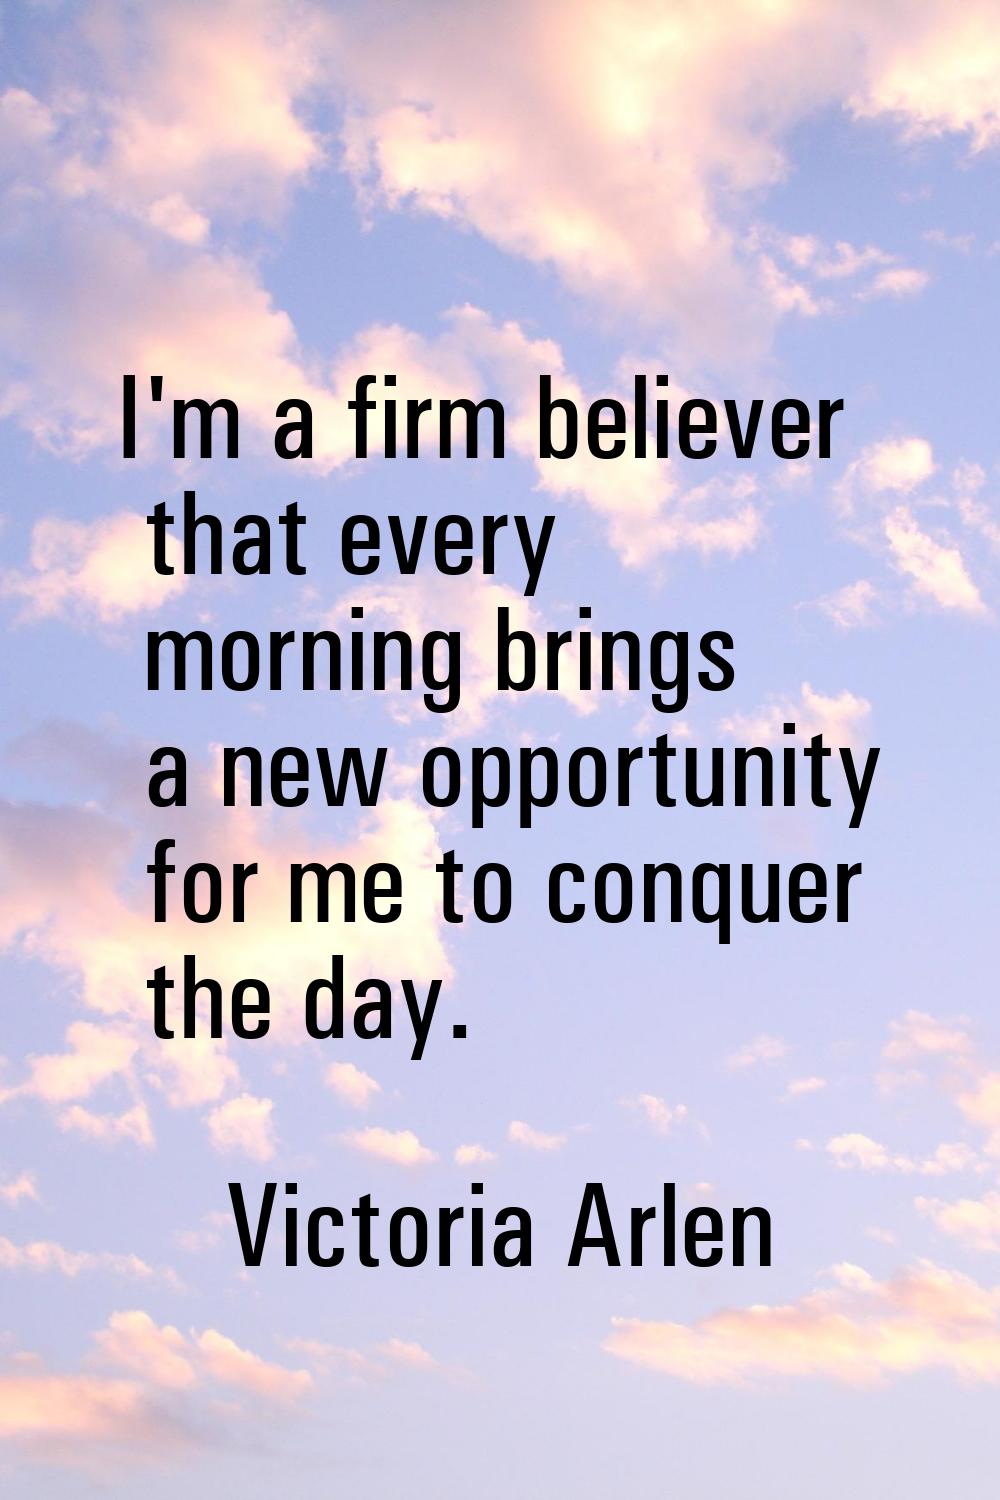 I'm a firm believer that every morning brings a new opportunity for me to conquer the day.